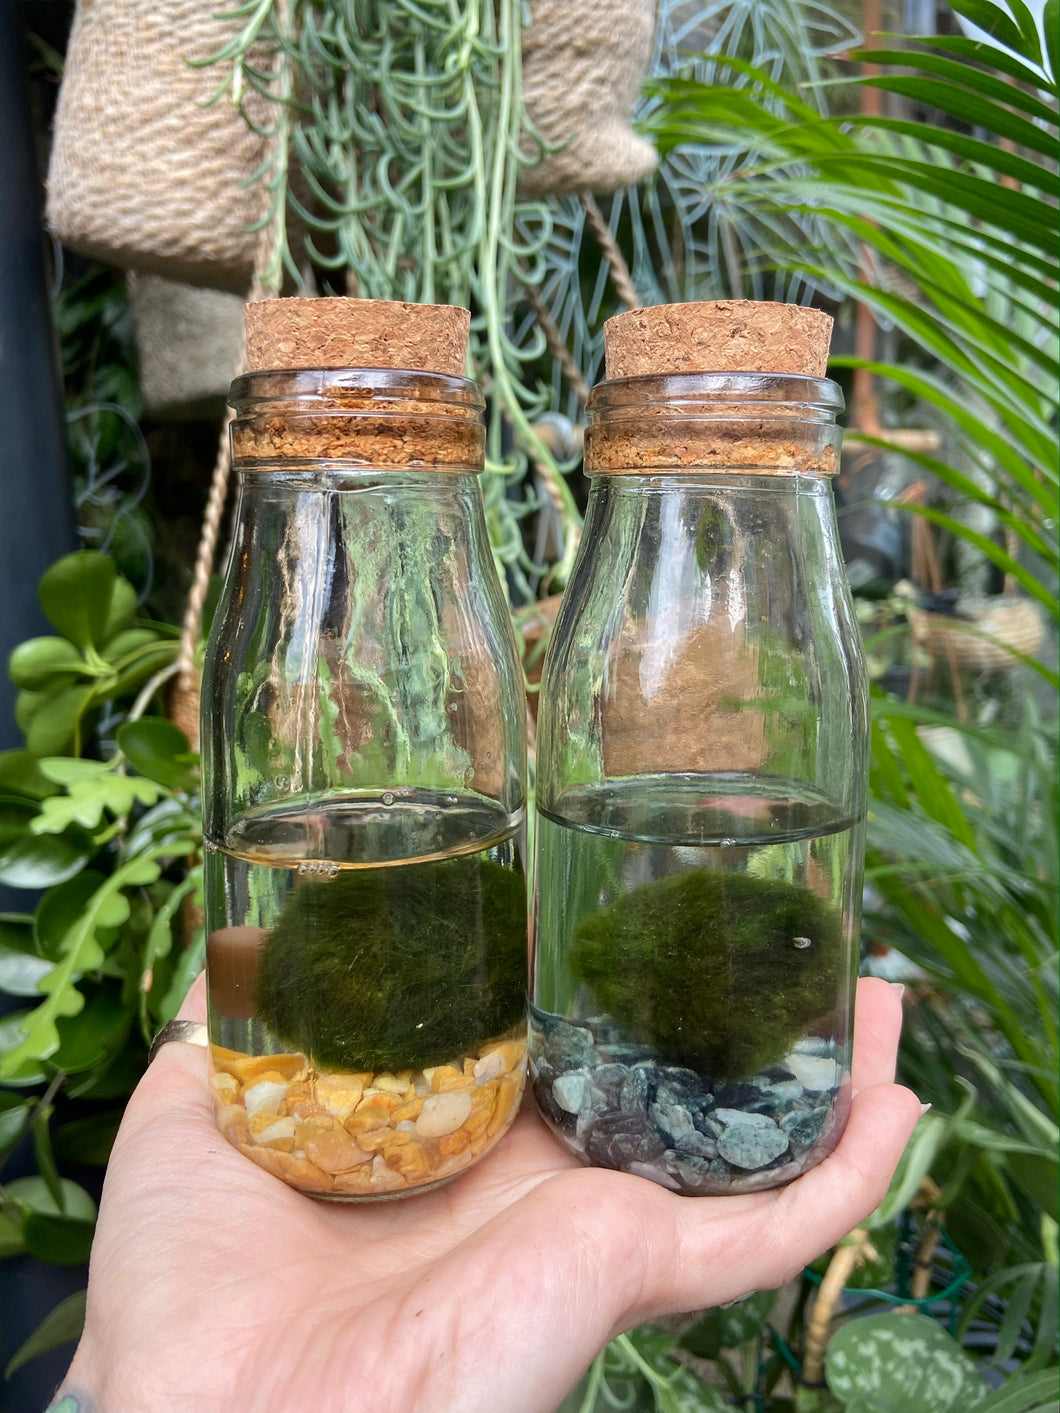 Marimo Moss Ball Terrarium Smaller - *Local Delivery or Local Pick Up Only*